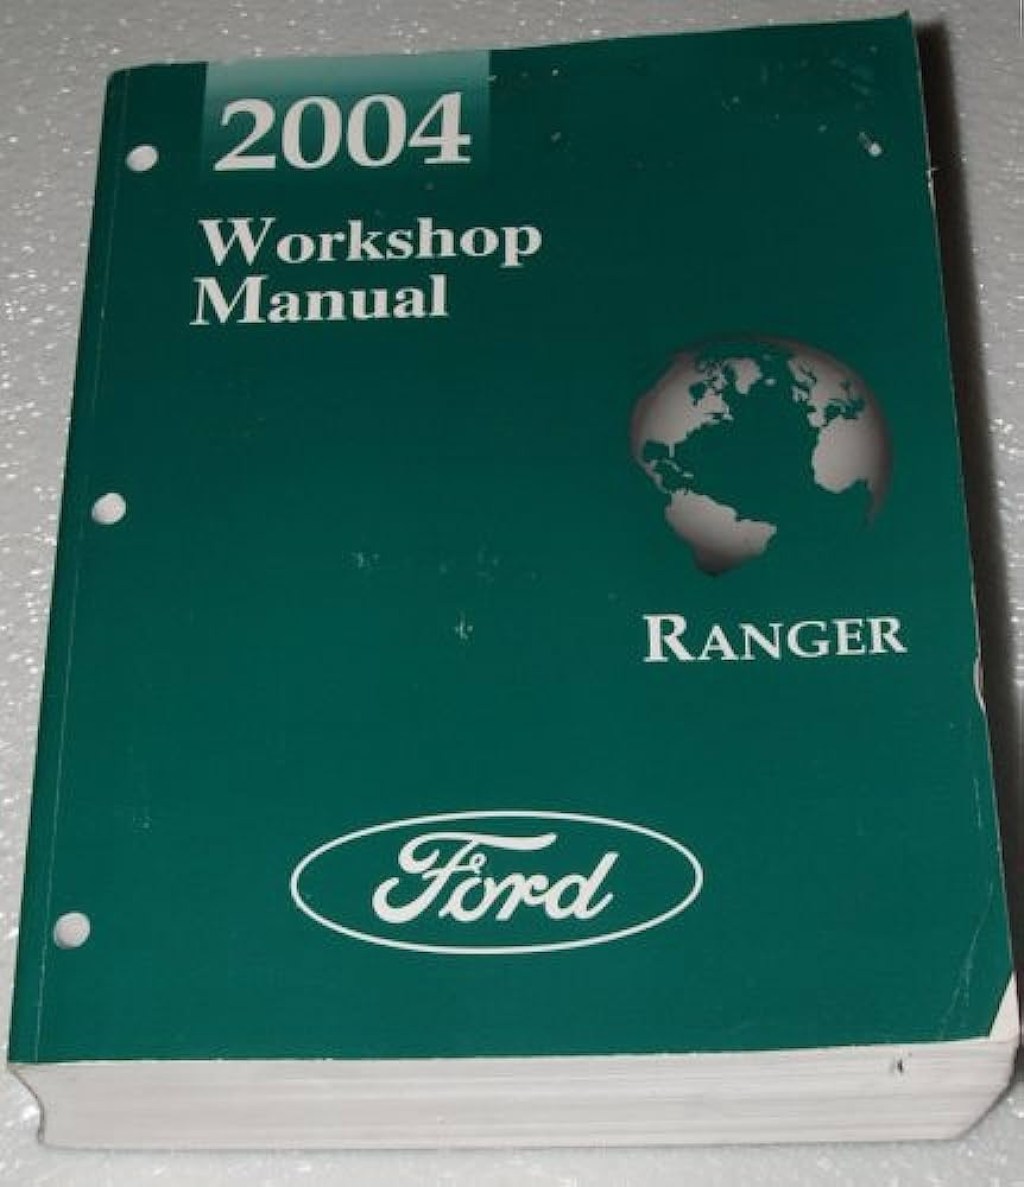 Picture of: Ford Ranger Workshop Manual: Ford Motor Company: Amazon